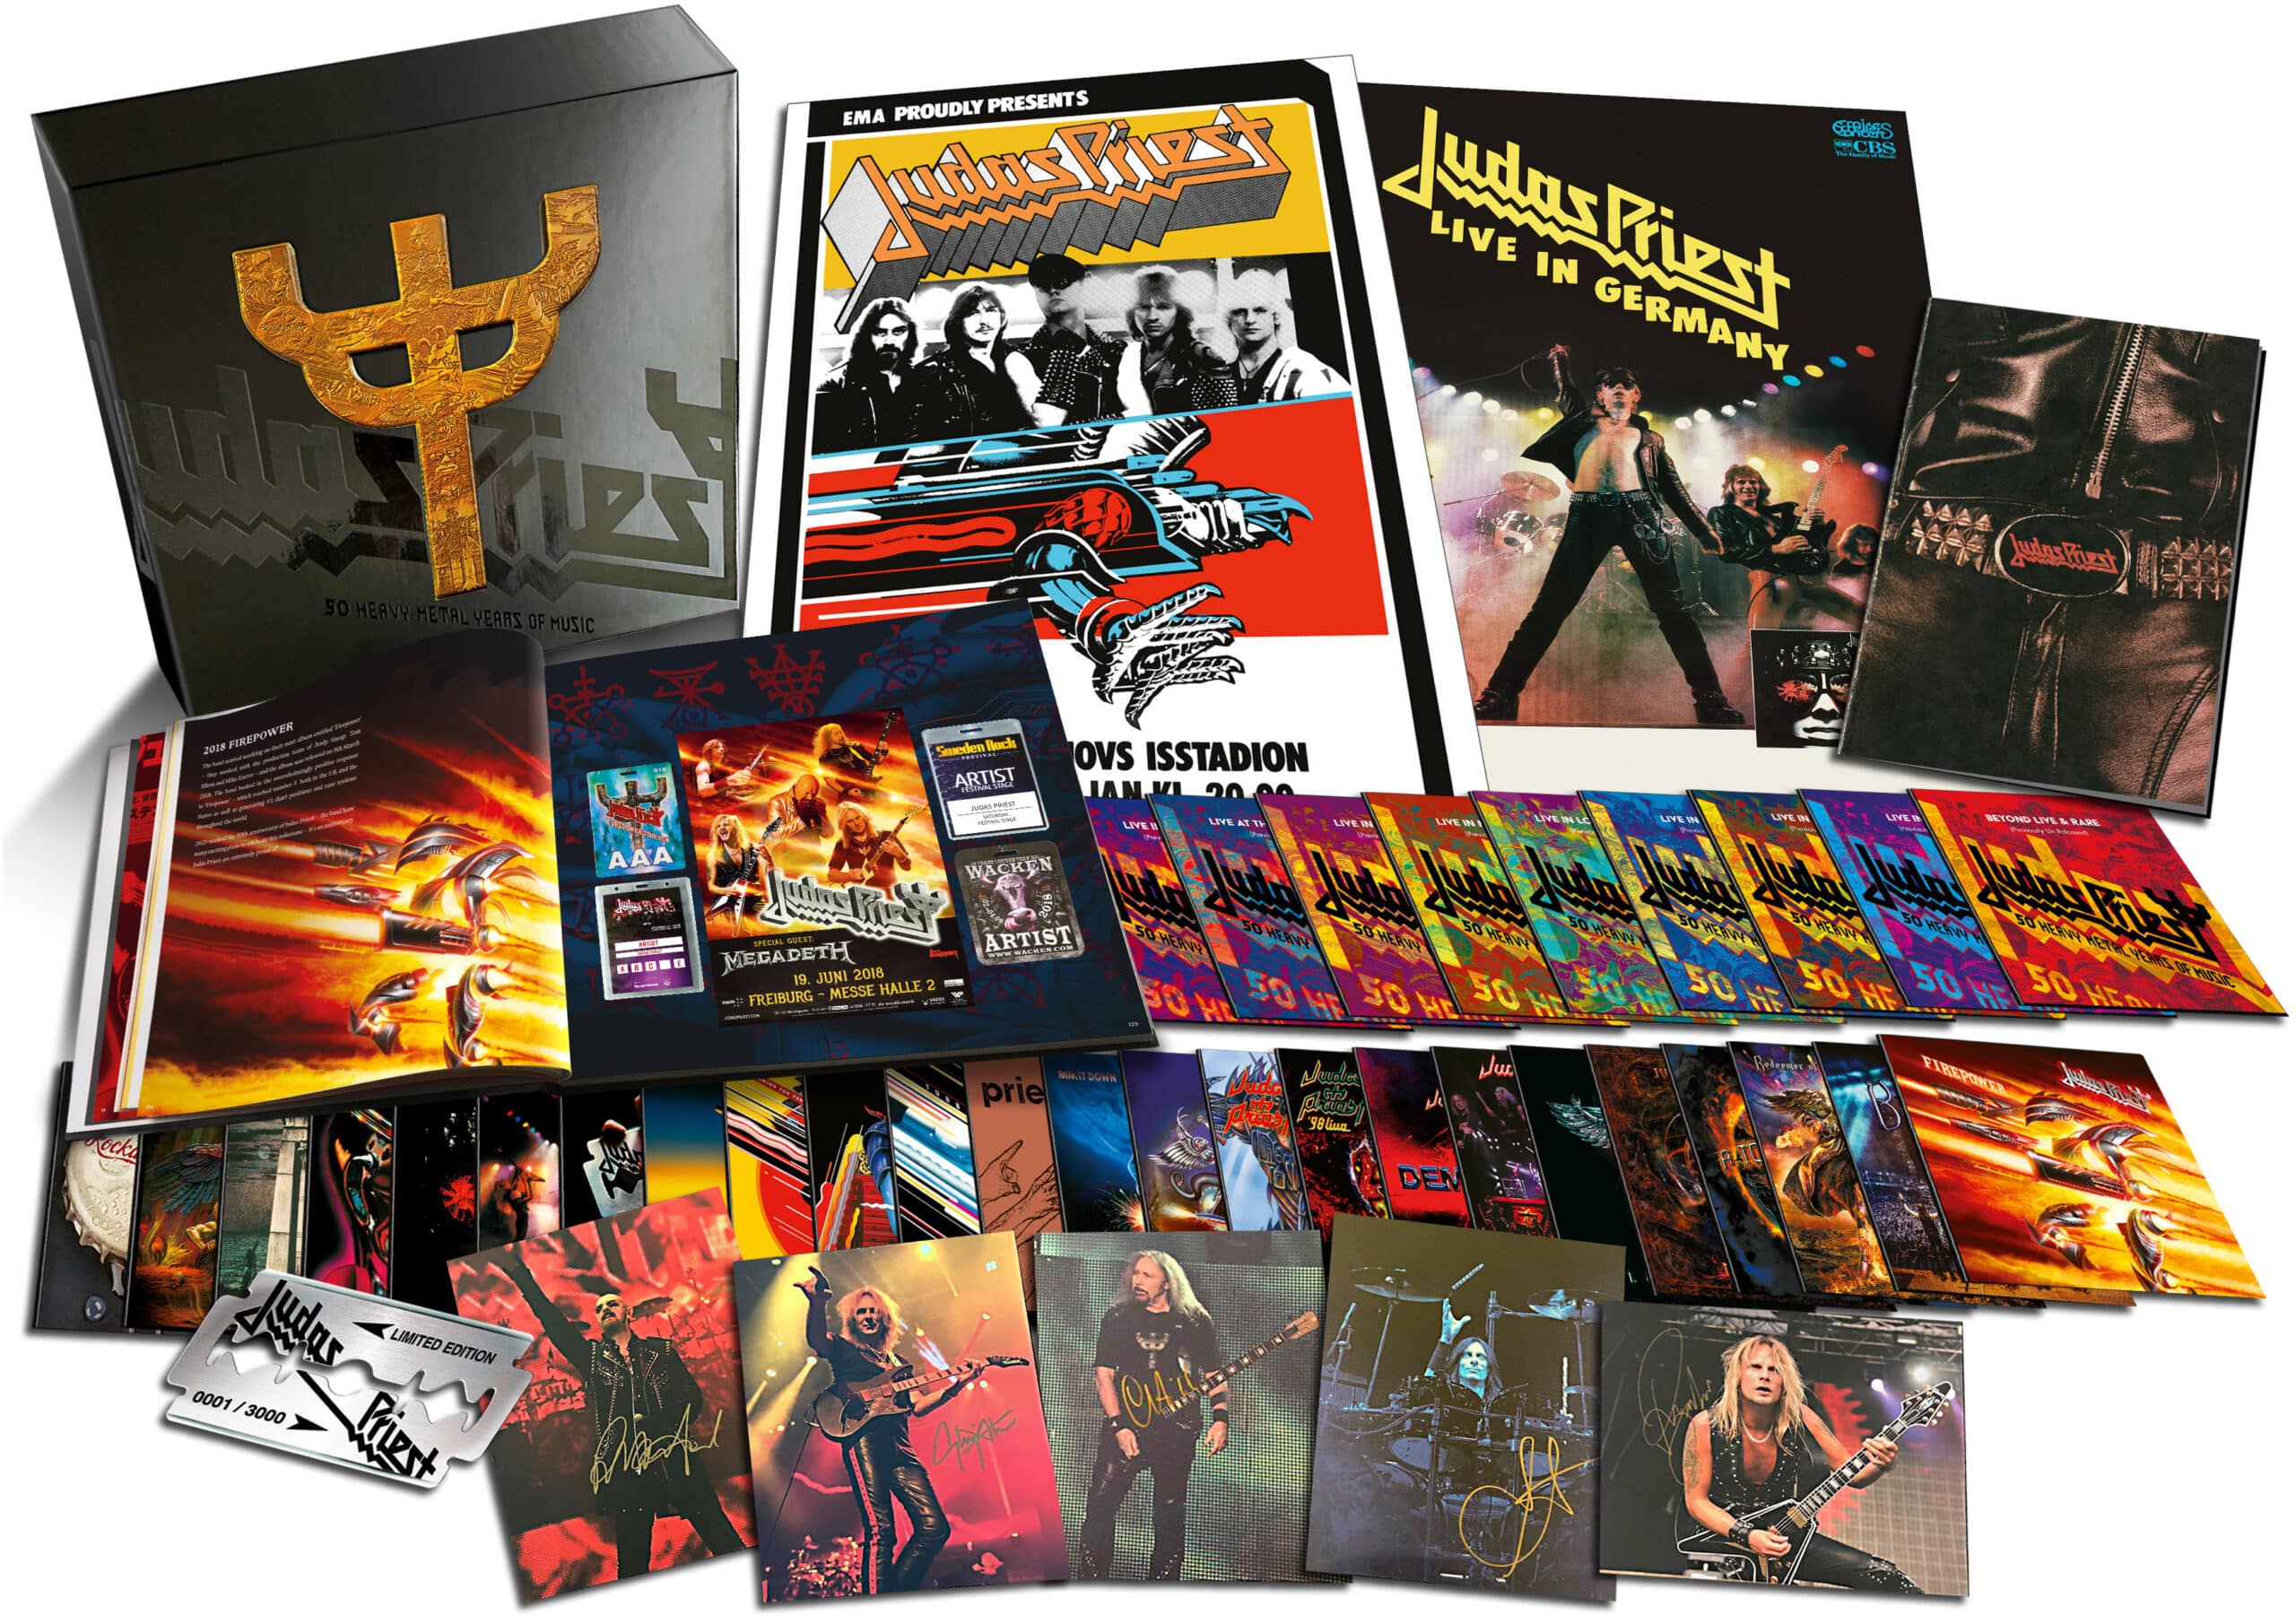 judas priest box set 2021, JUDAS PRIEST To Release &#8217;50 Heavy Metal Years Of Music&#8217; Limited Edition Box Set In October